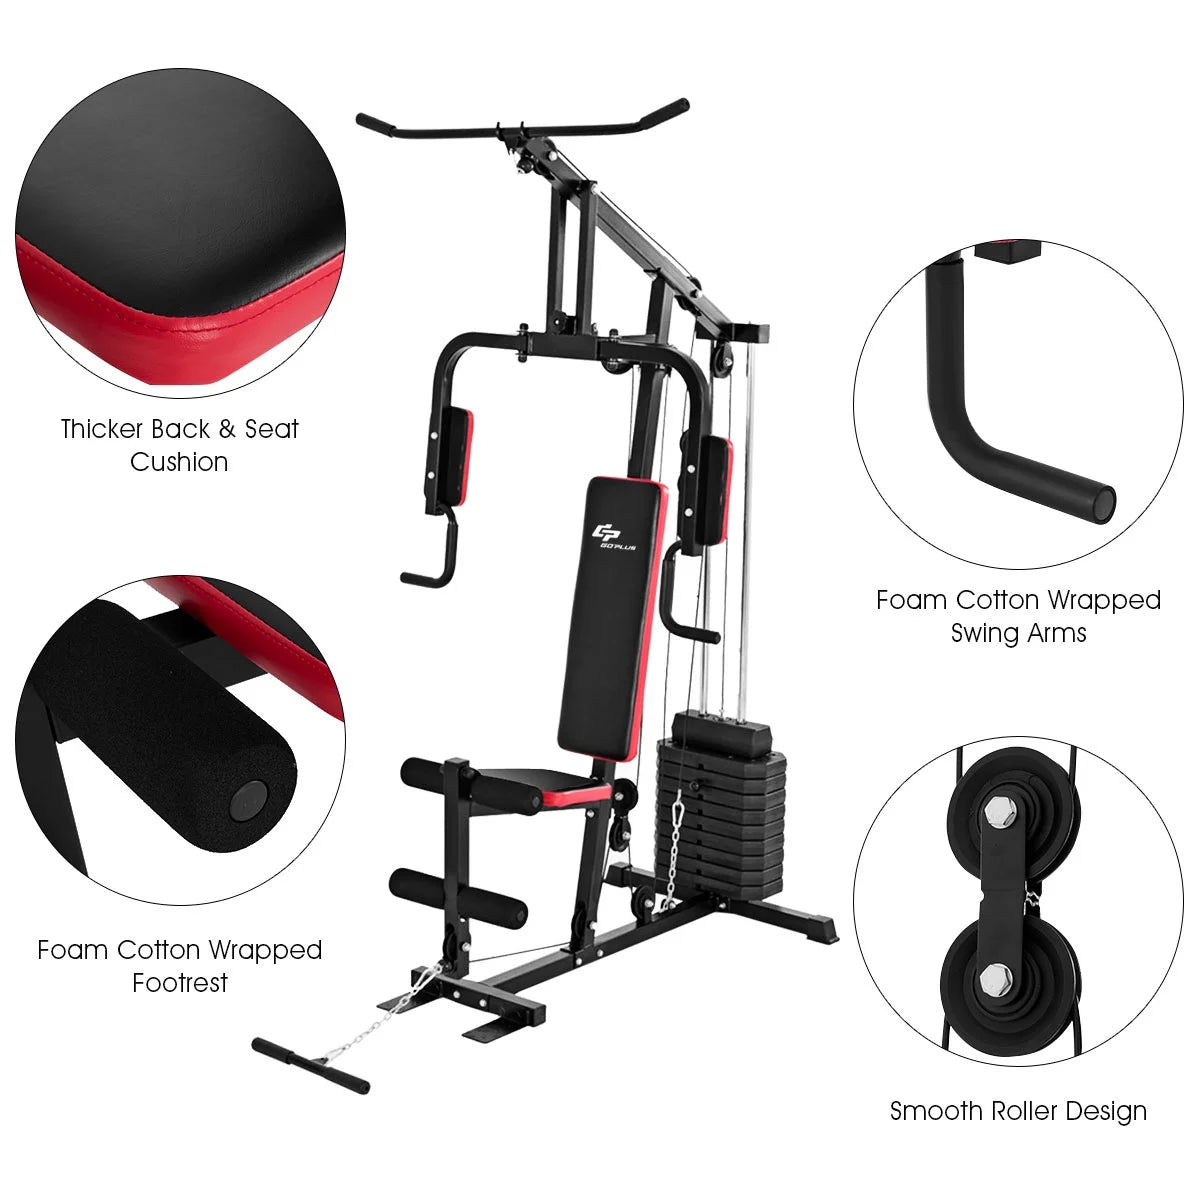 Multifunction Cross Trainer Workout Machine Strength Training Fitness Exercise